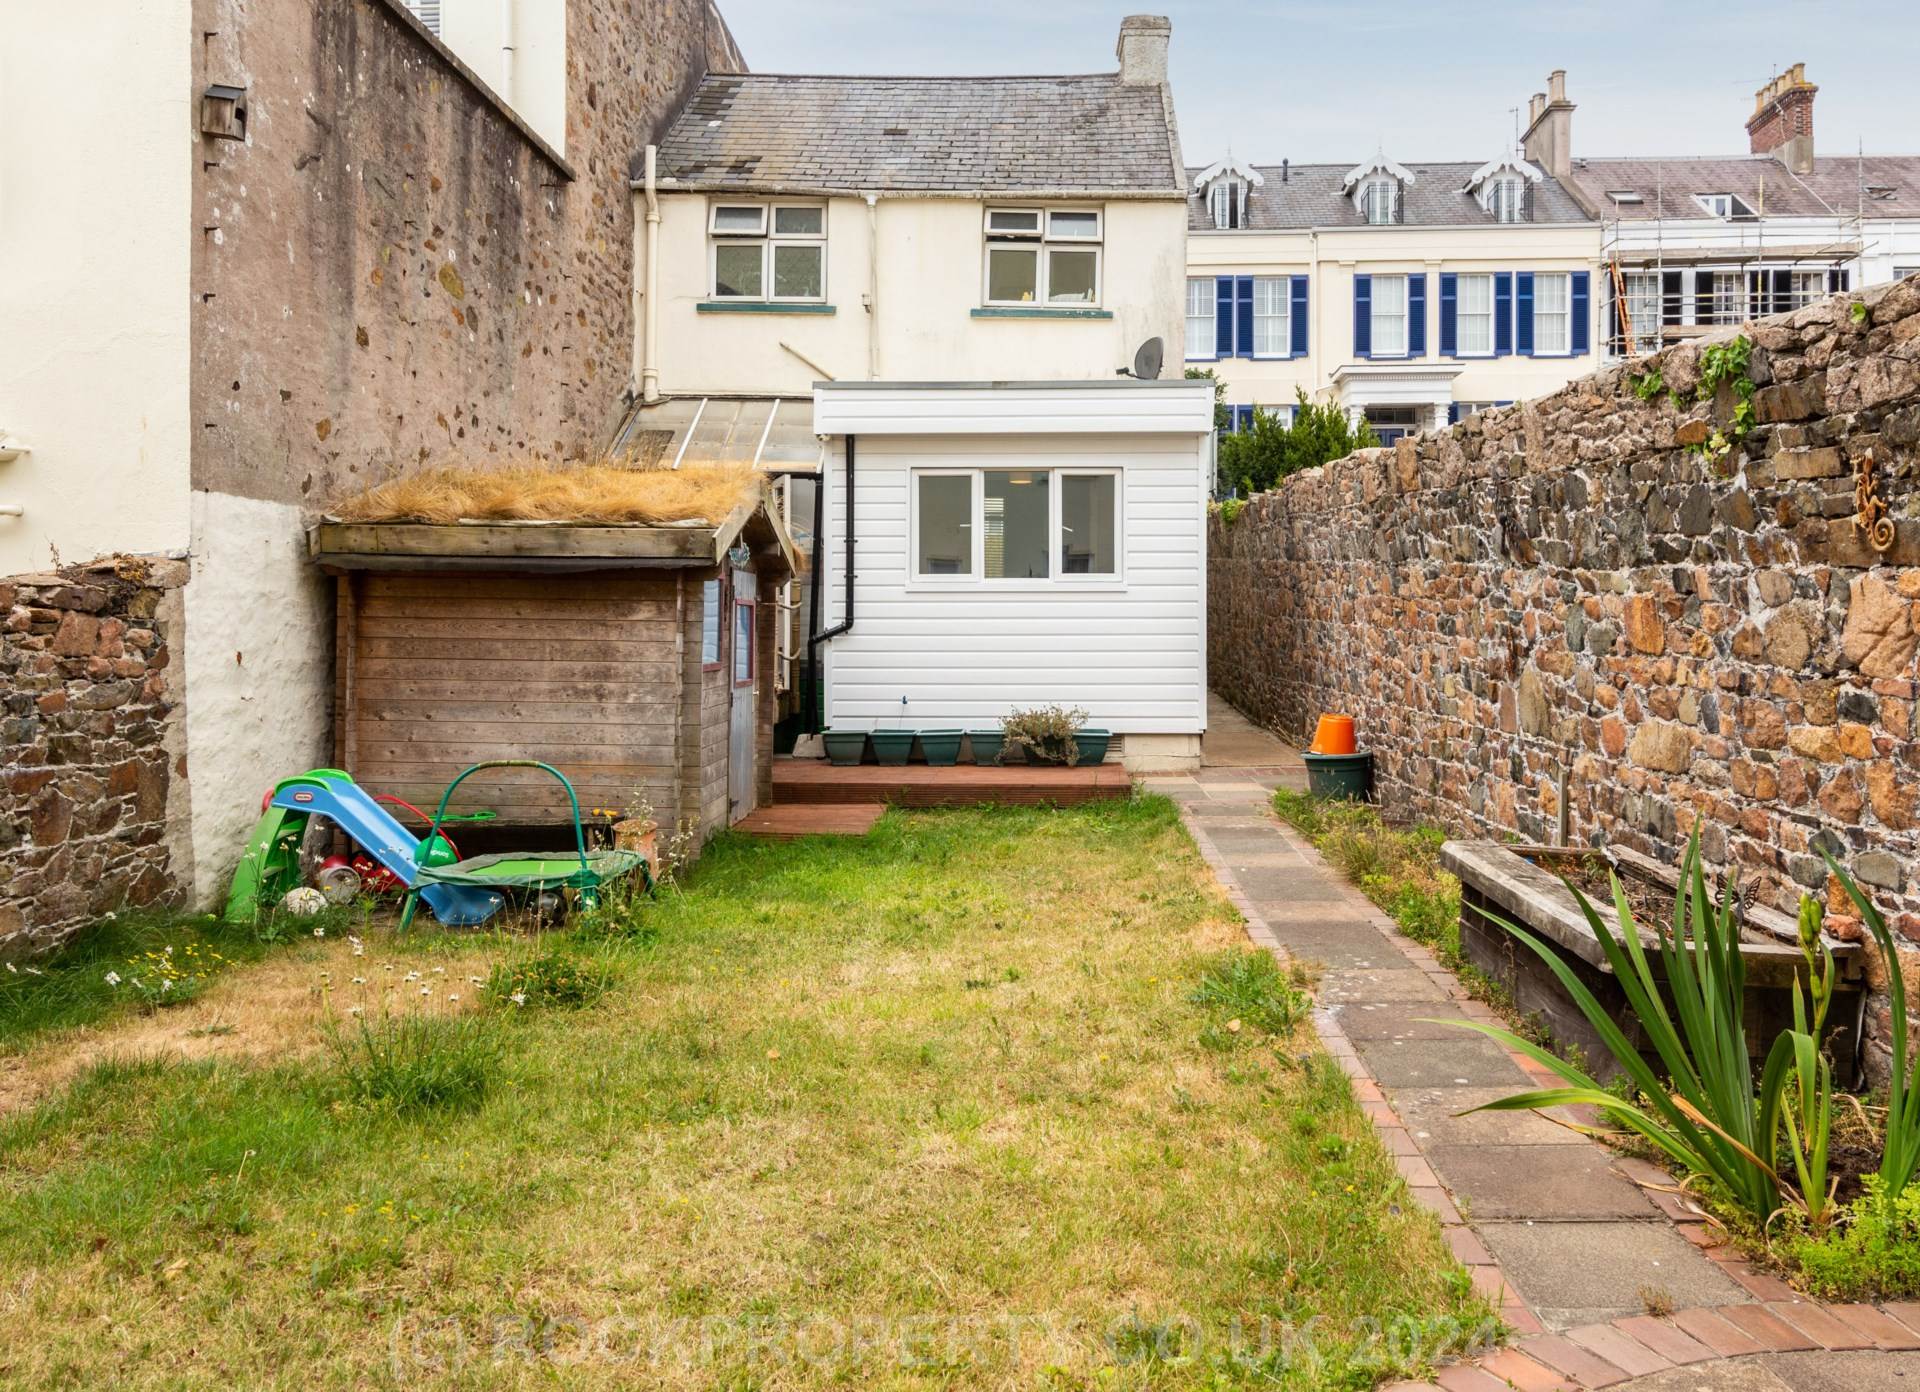 2/3 BED COTTAGE, Queens Road, St Helier, Image 2